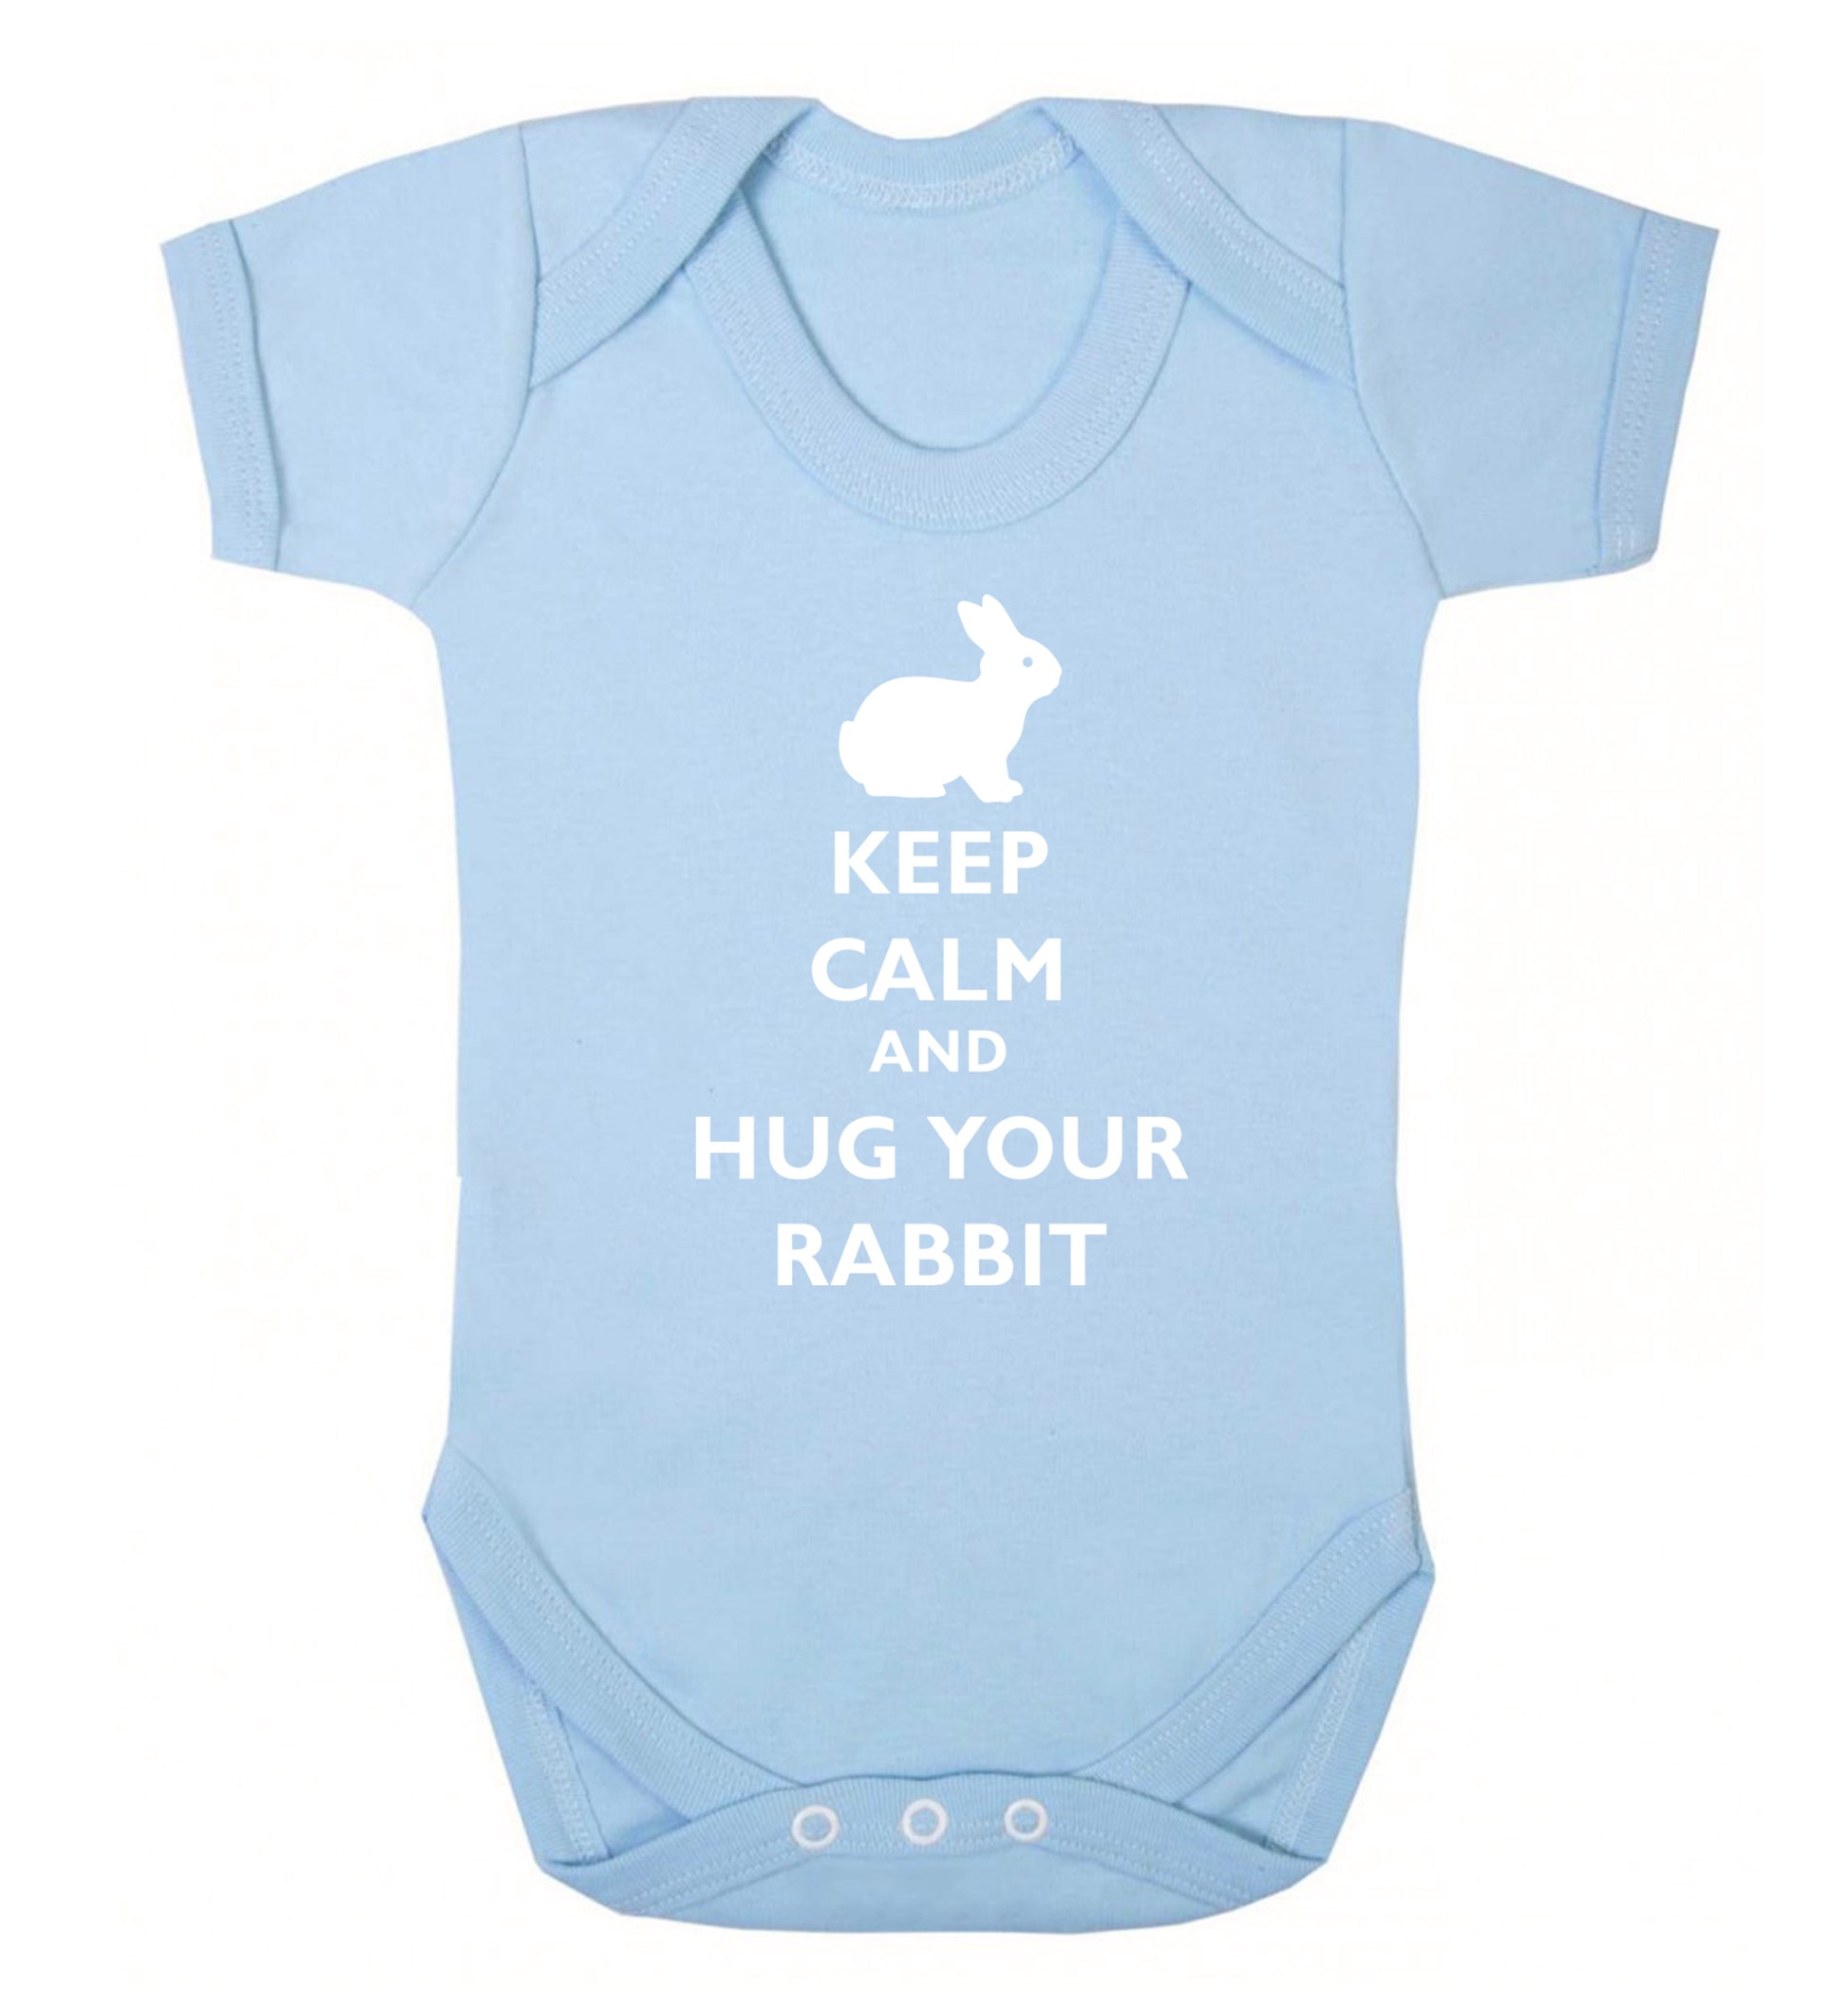 Keep calm and hug your rabbit Baby Vest pale blue 18-24 months